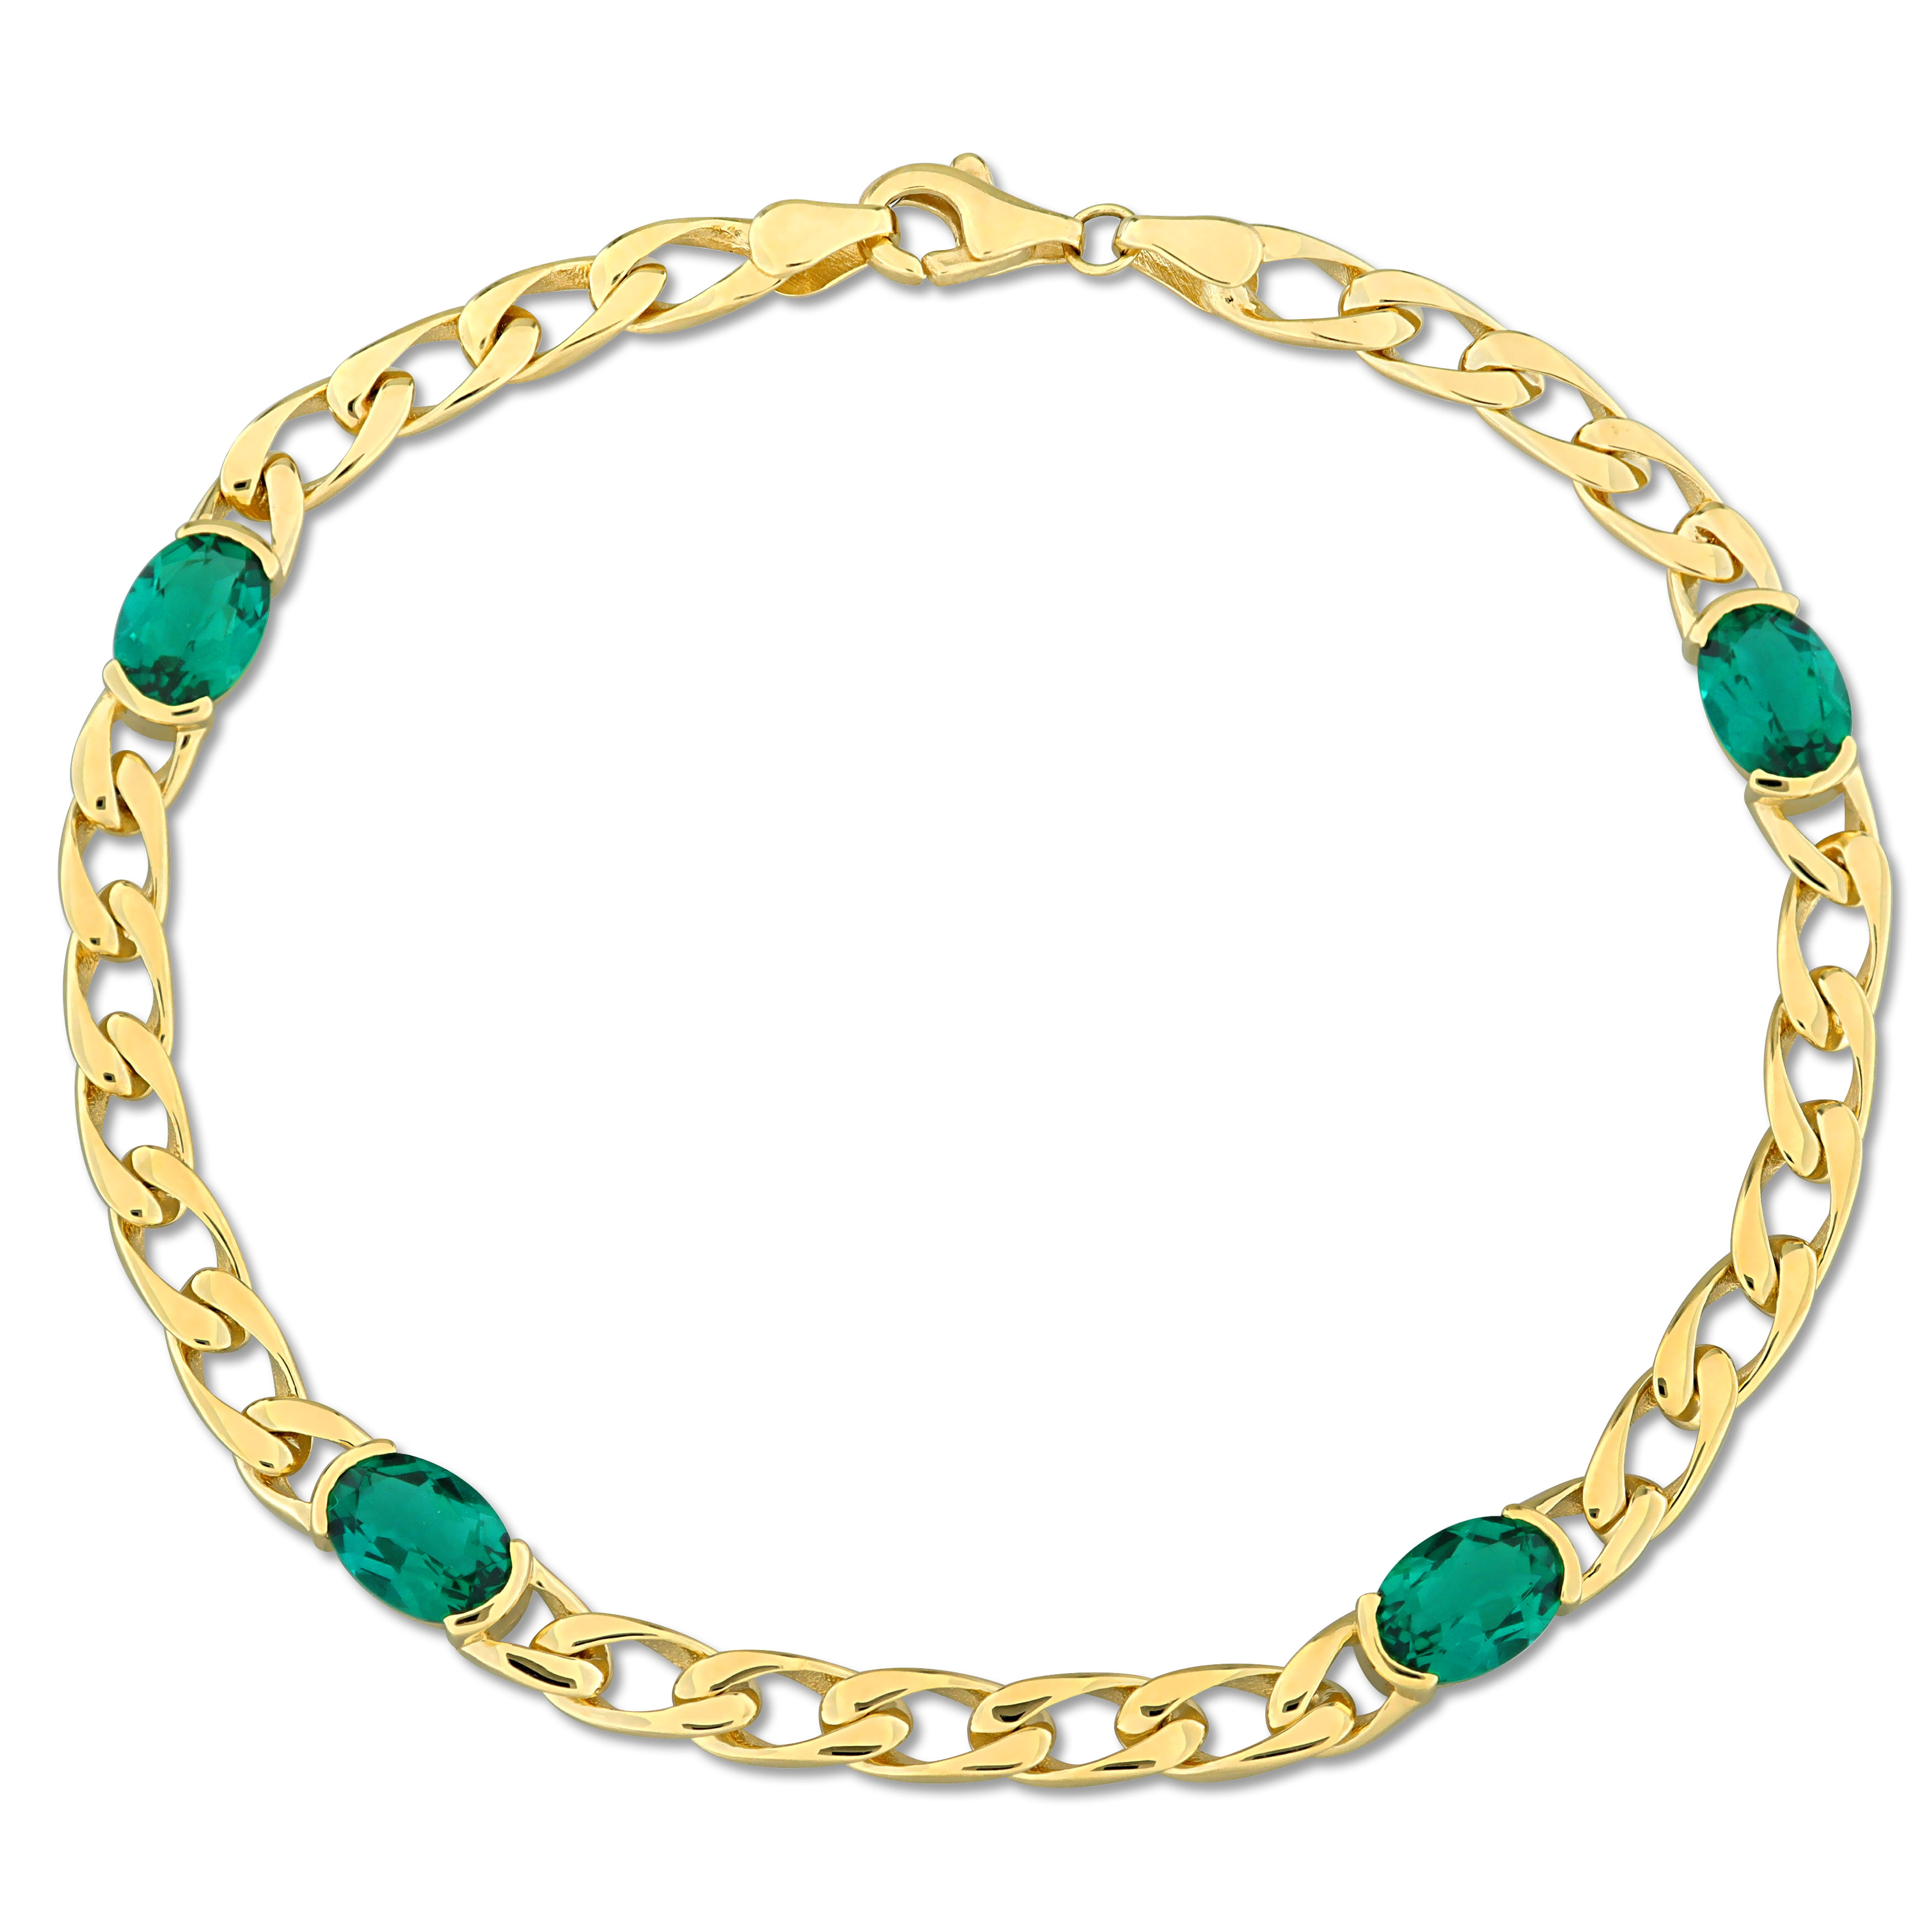 2 4/5 CT TGW Oval-Cut Created Emerald Curb Link Station Bracelet in 10k Yellow Gold - 7.5 in.